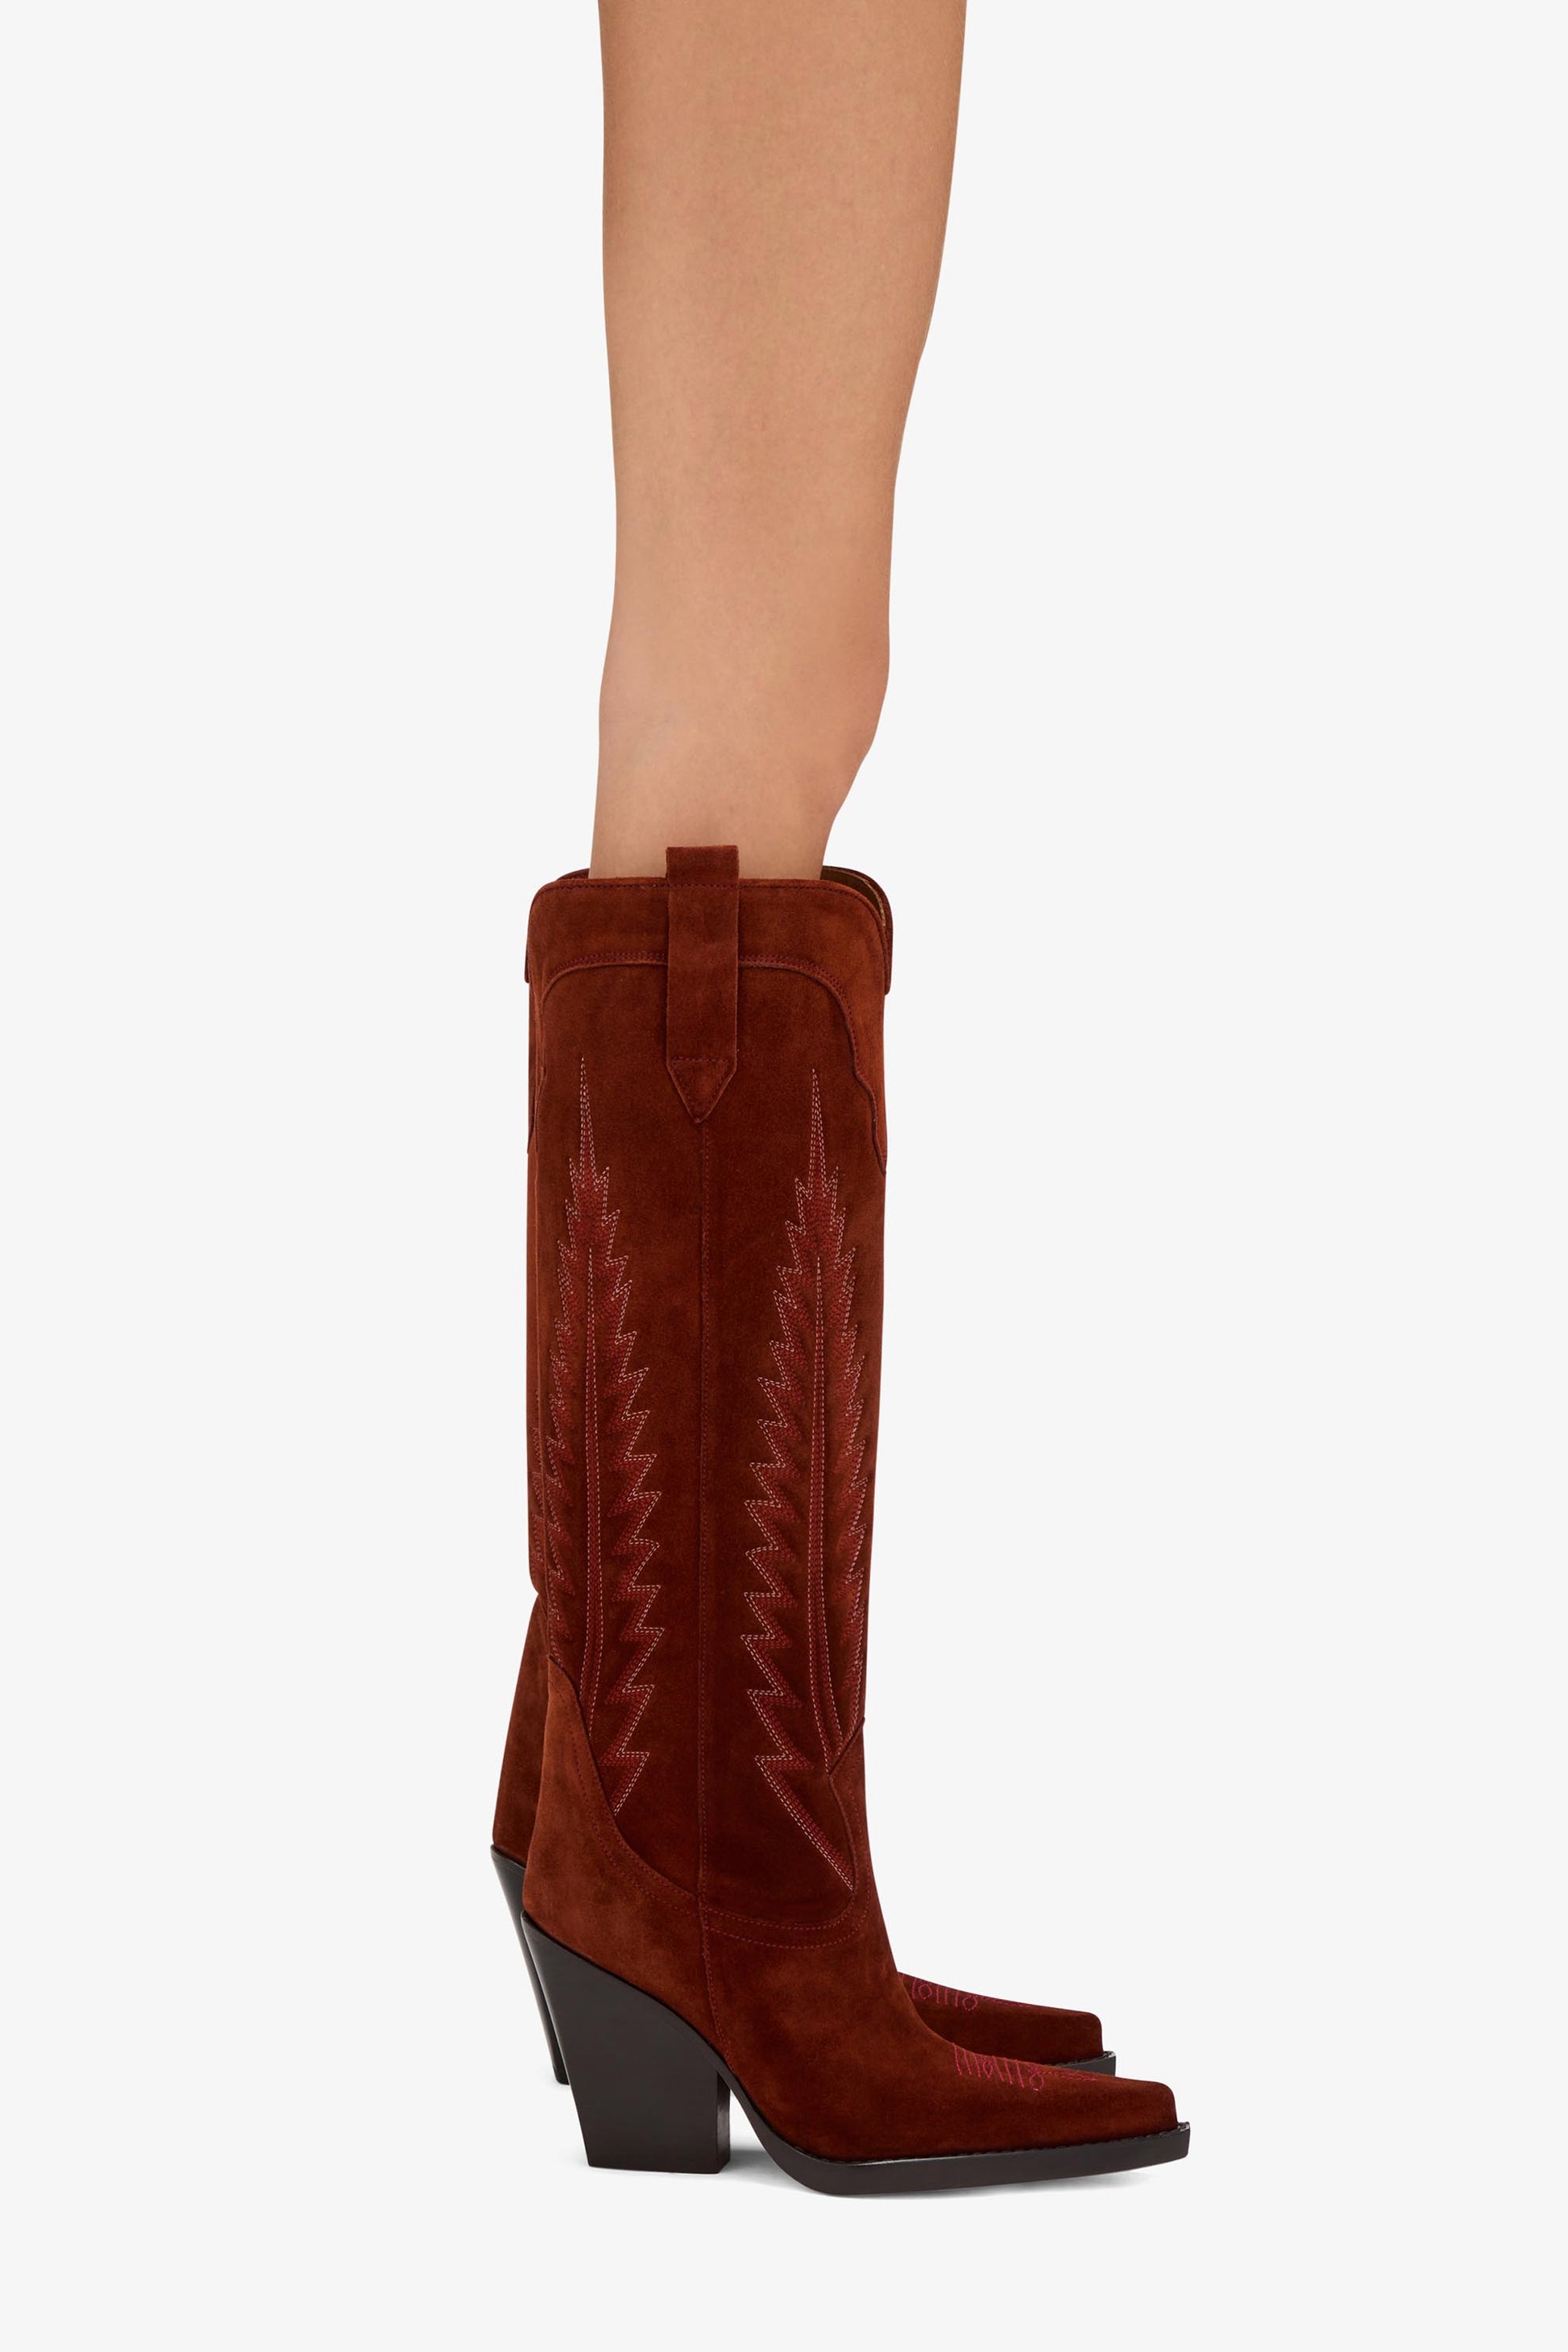 Rust suede embroidered Texan boot - Product worn